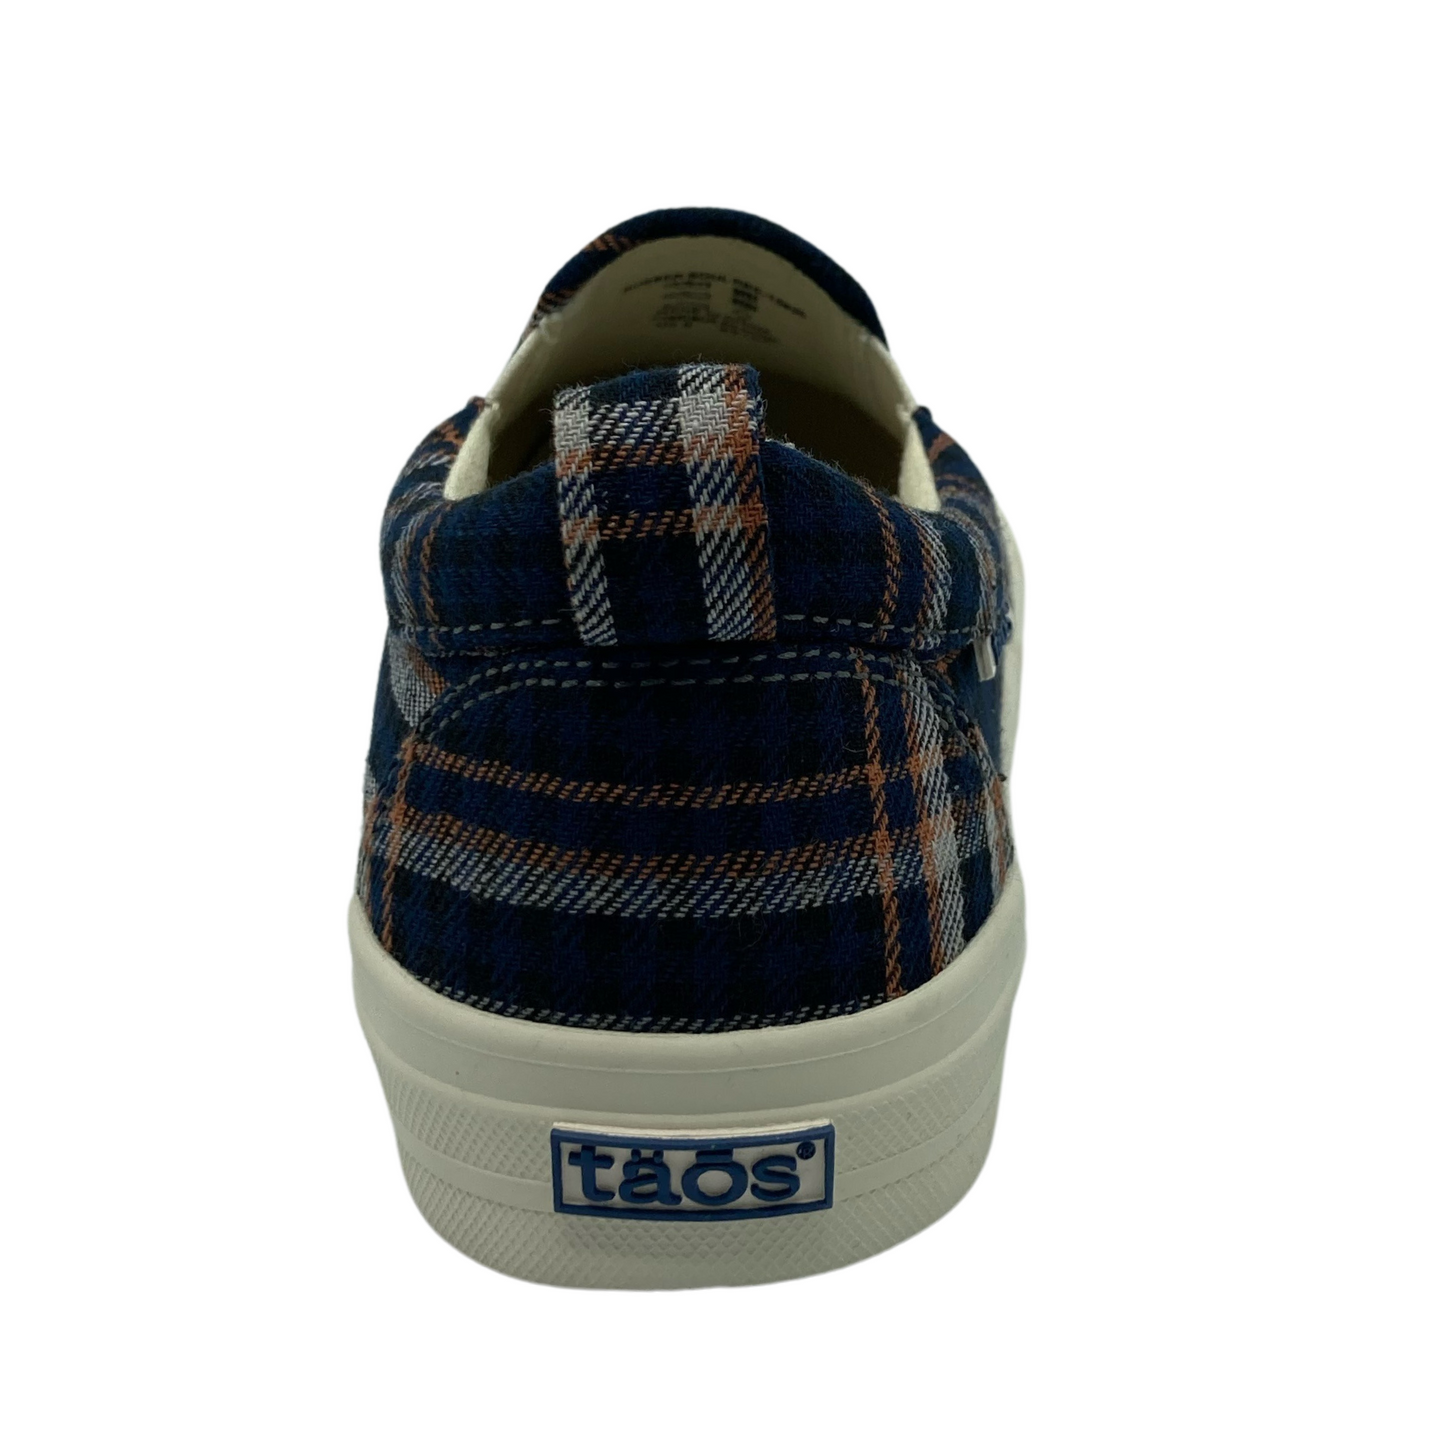 Back view of blue plaid slip on shoe with white rubber sole